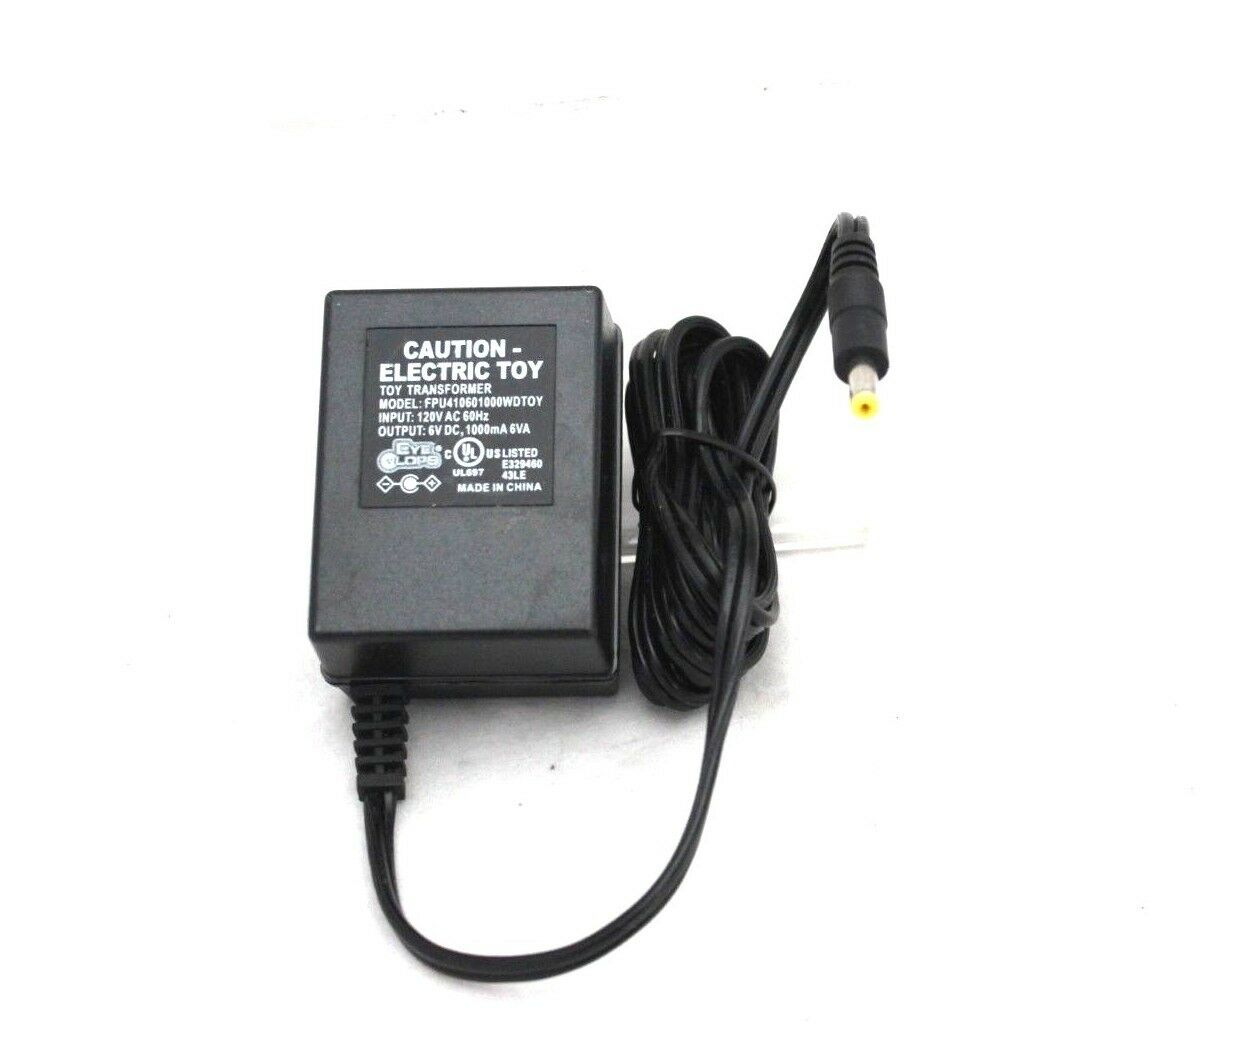 ELECTRIC TOY Transformer Adapter Charger FPU414060100WDTOY 6VDC 100mA 6VA Brand: ELECTRIC TOY Com - Click Image to Close